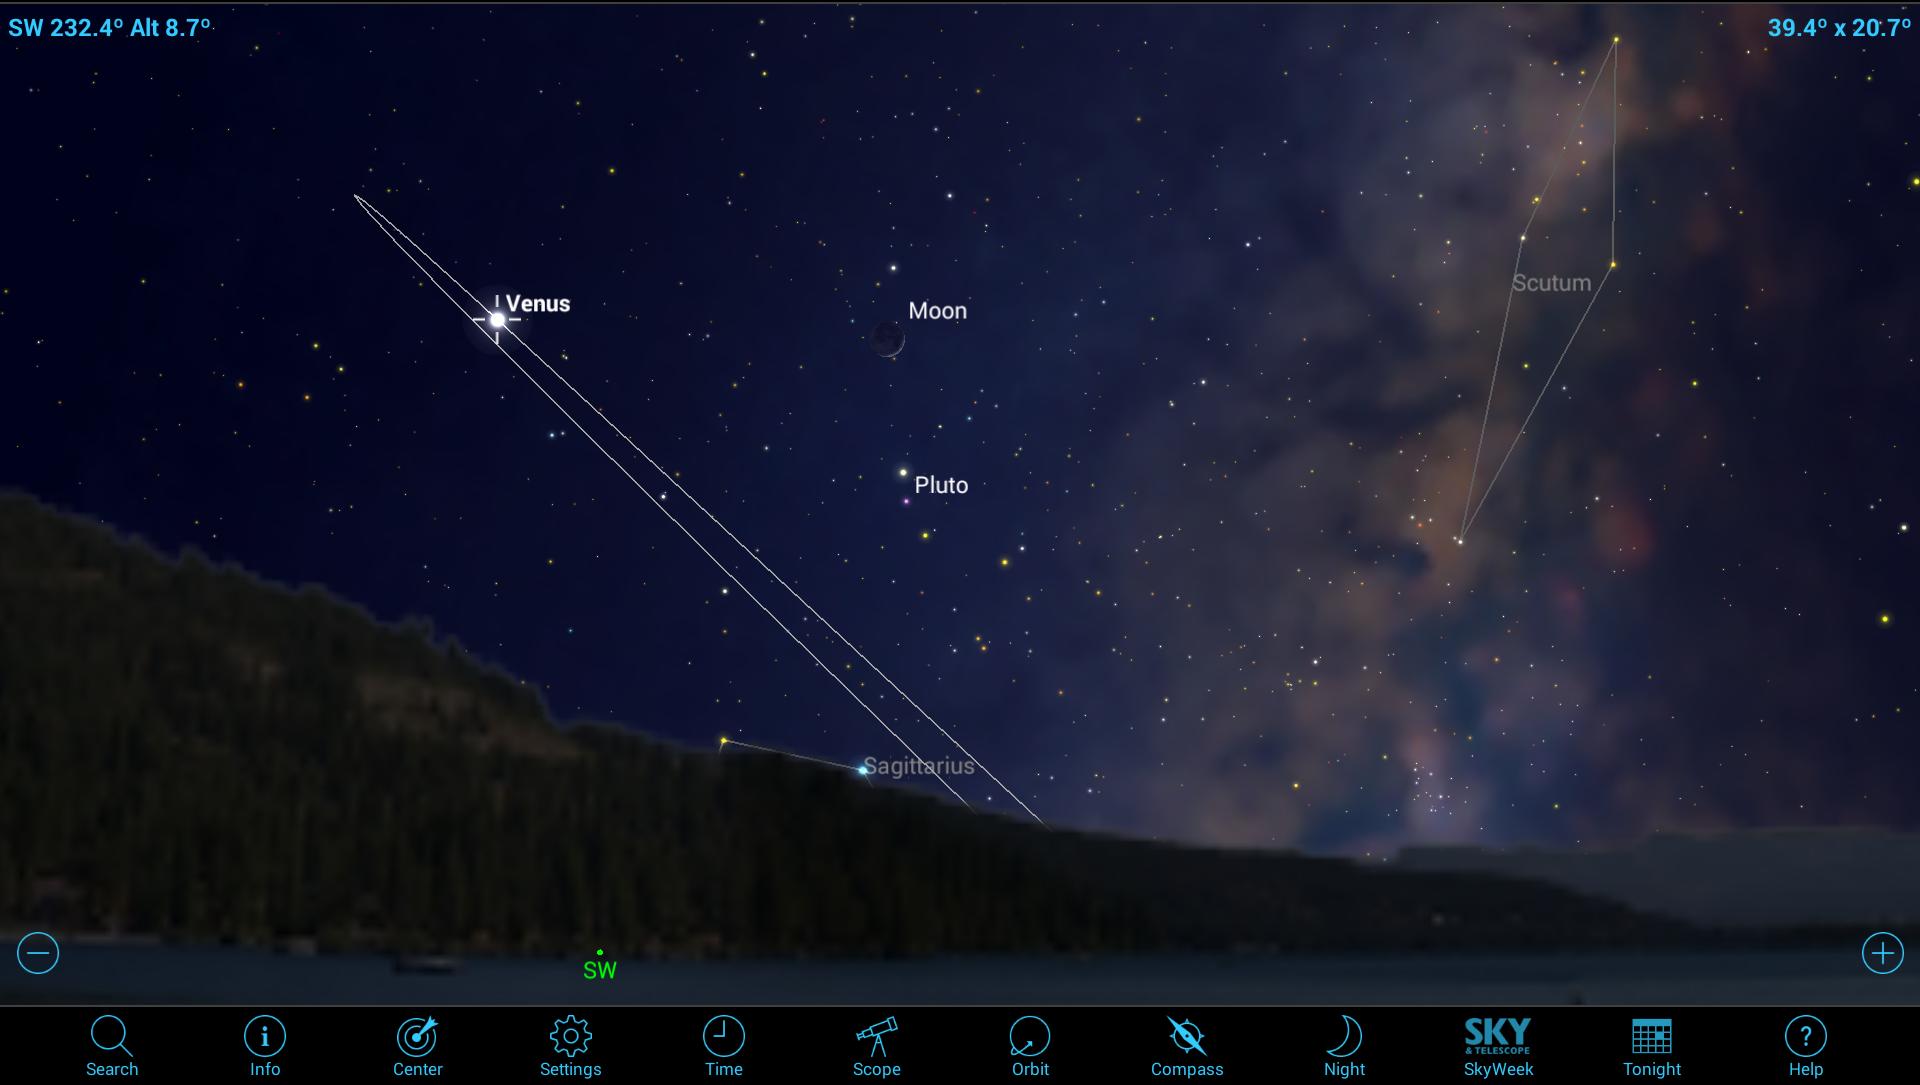 Admiring the Beauty of Venus with Mobile Astronomy Apps